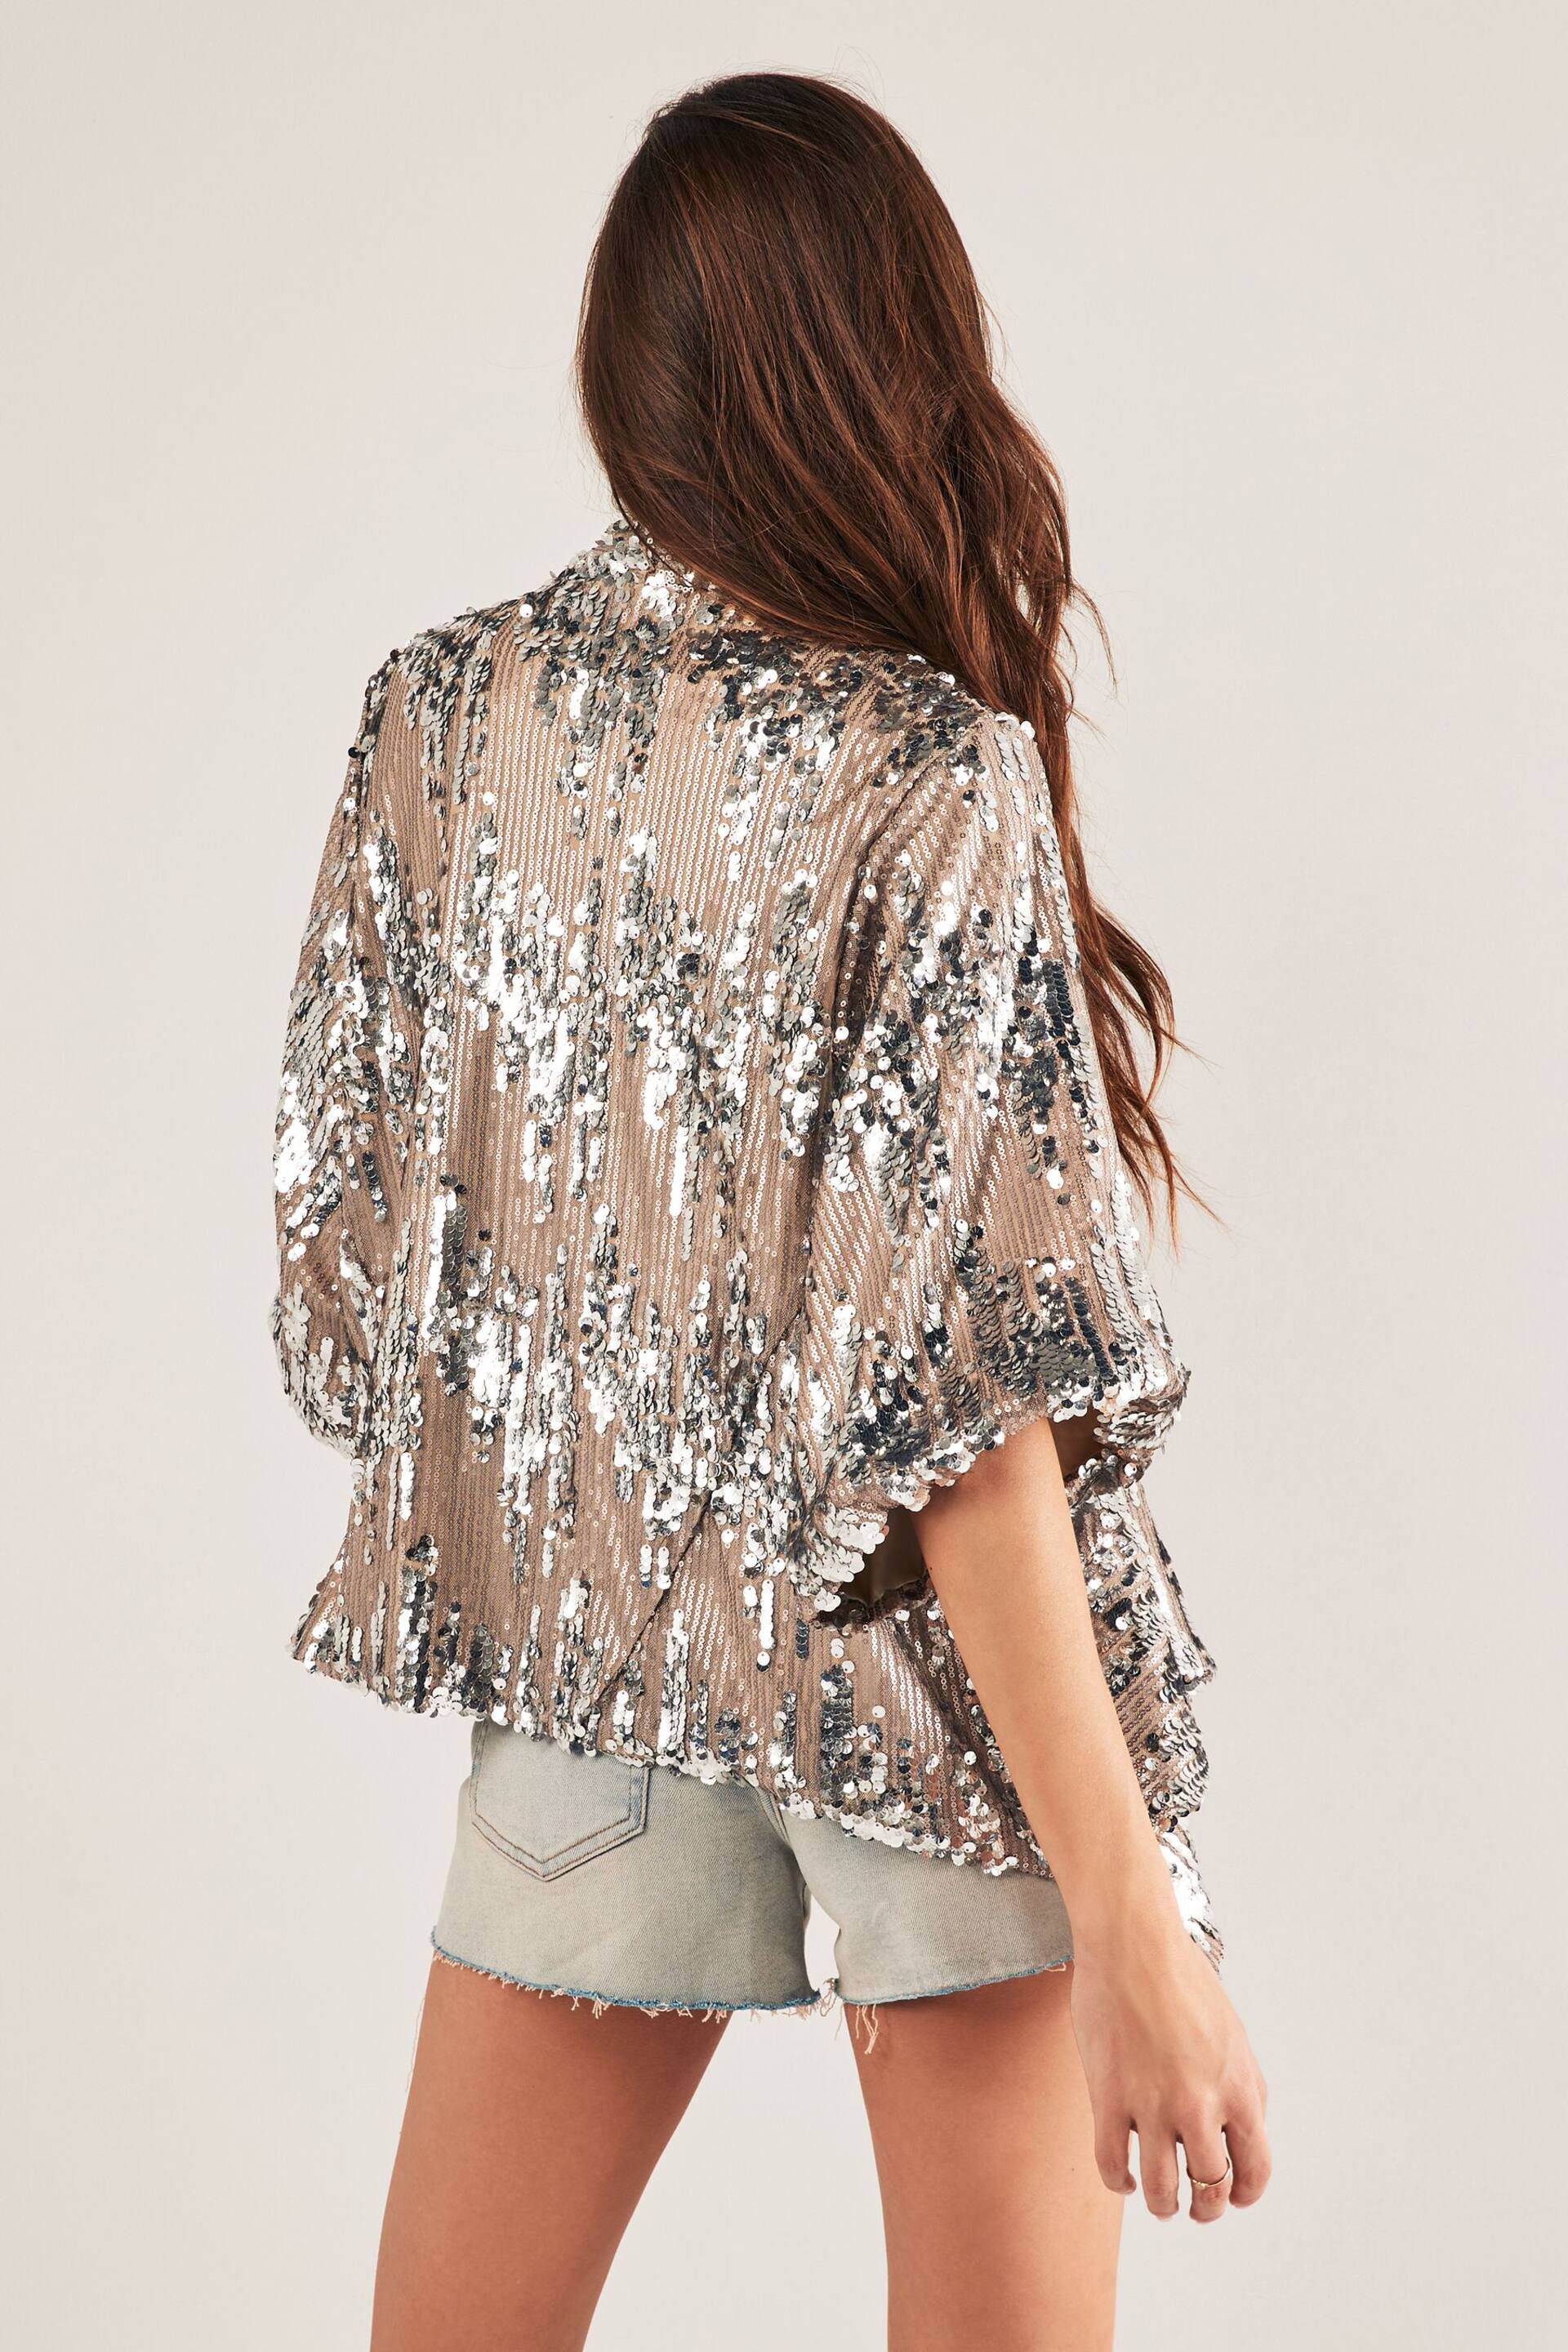 Silver Sequin Jacket Cover-Up - Image 2 of 6